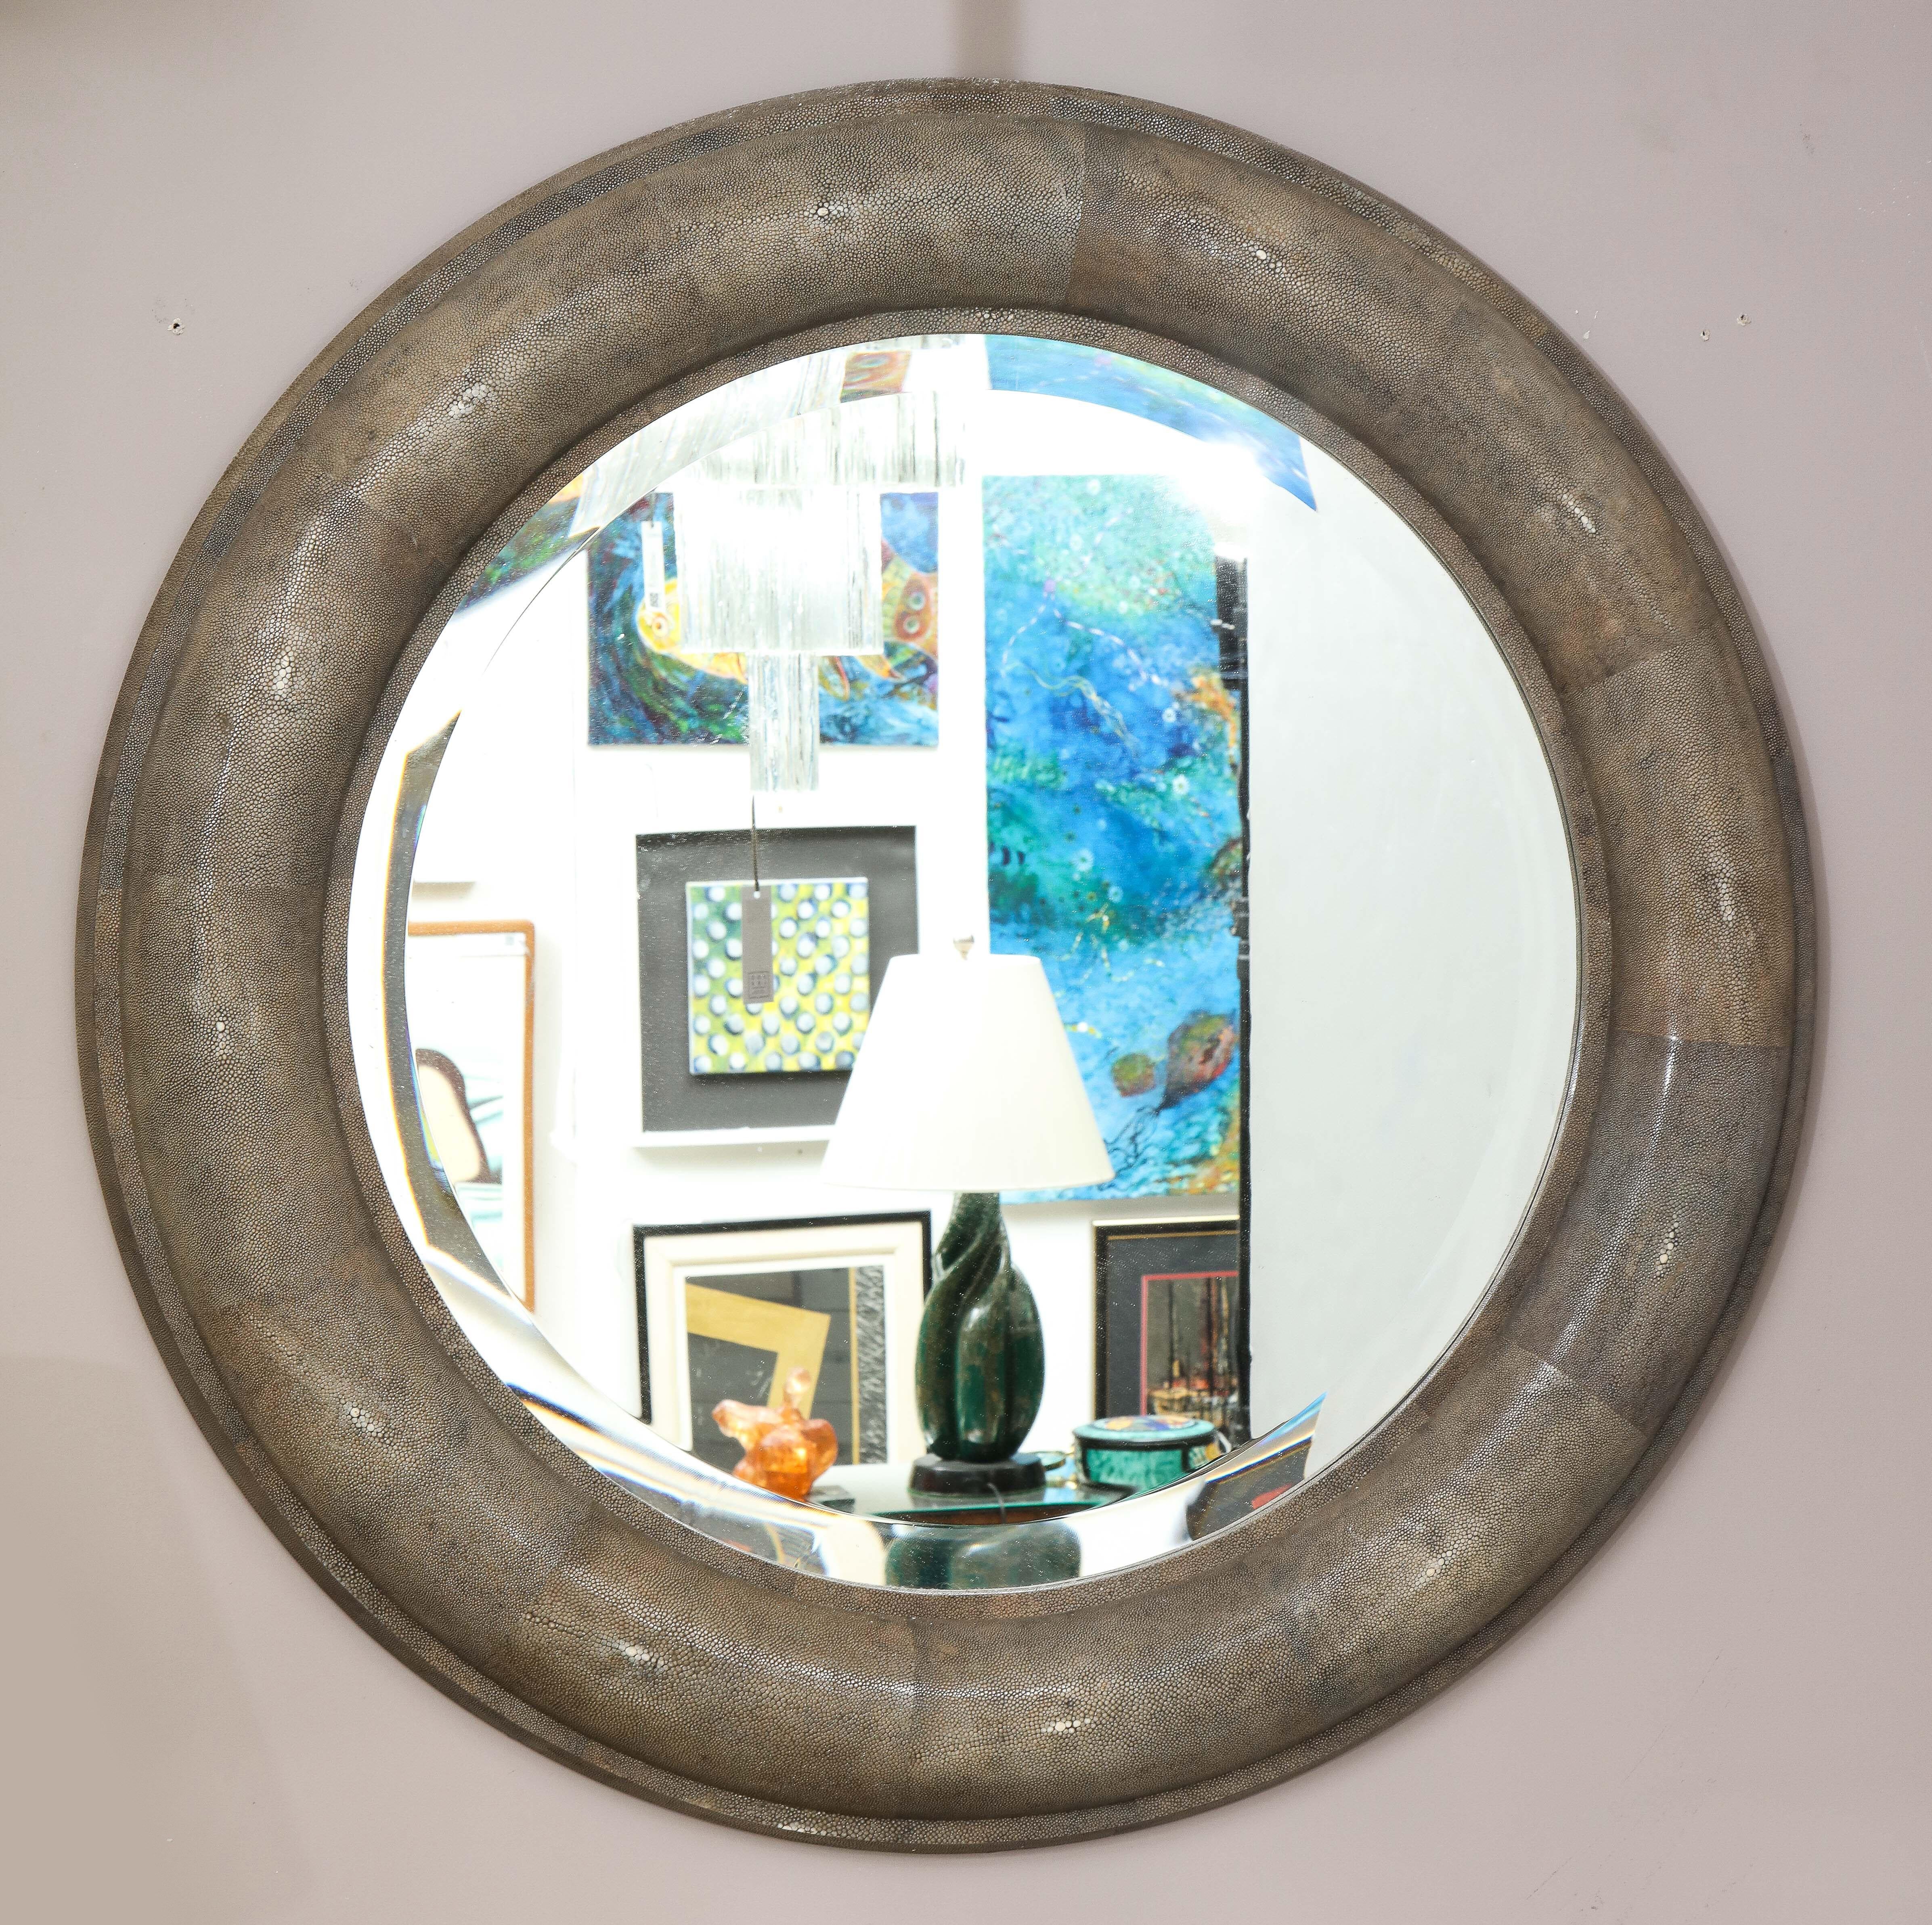 A large Shagreen beveled circular mirror by Karl Springer. A fabulous mirror in a green/grey authenticated by Tom Langevin former director of design Springer LTD. This design is from 1975.